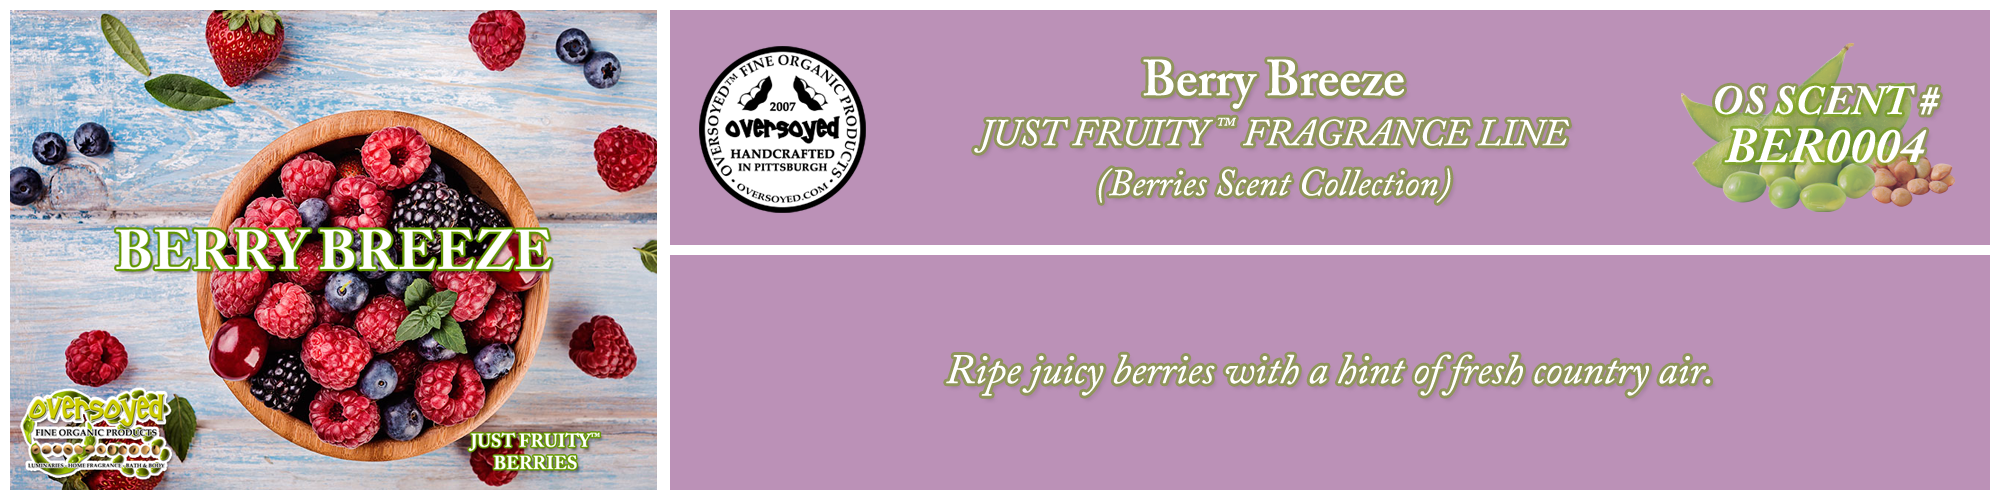 Berry Breeze Handcrafted Products Collection